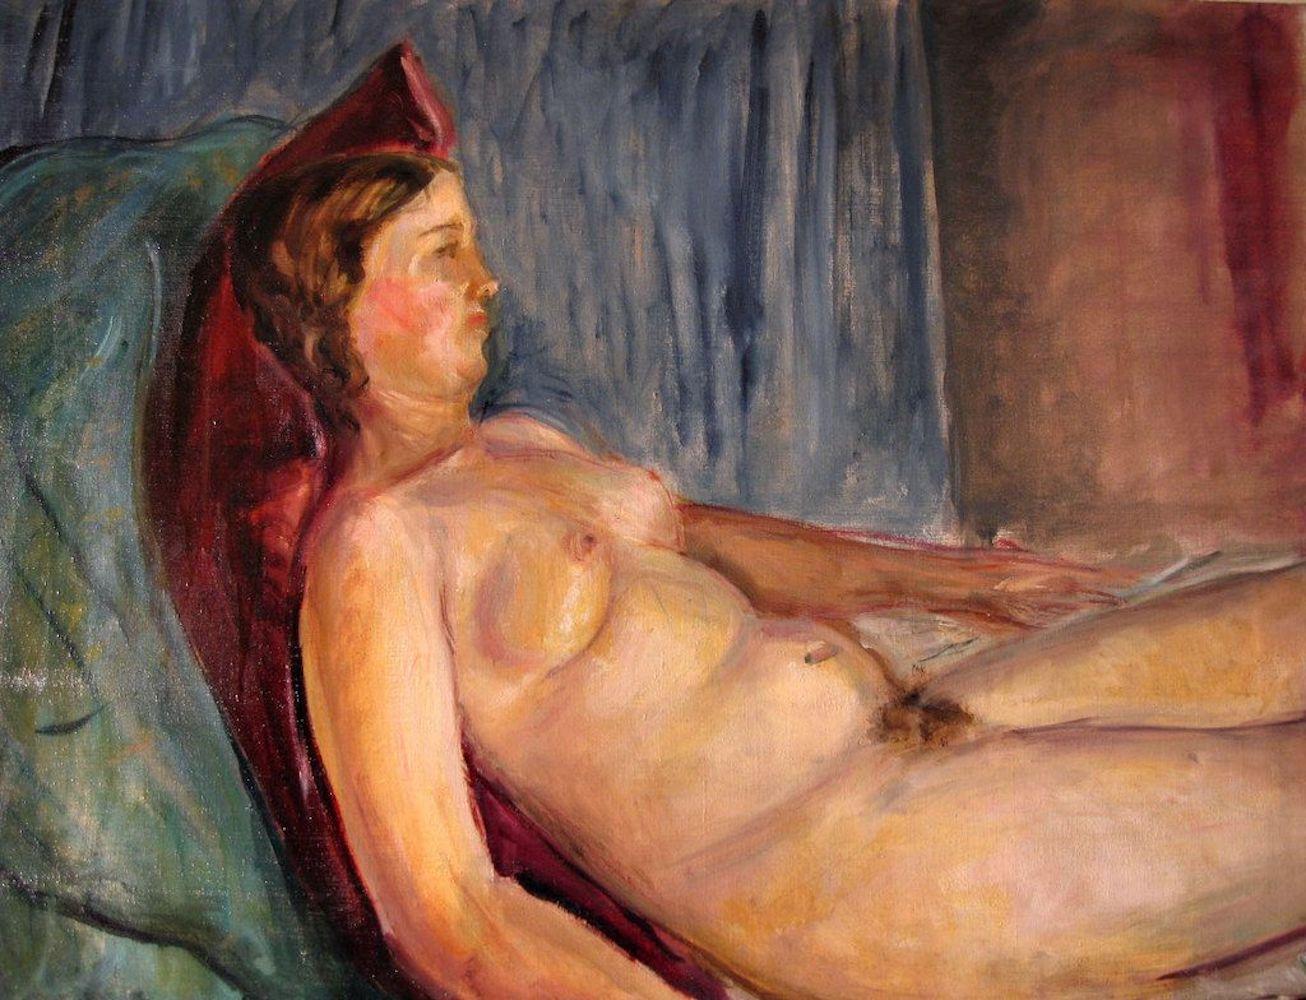 Nude of Woman if an original oil on wooden panel realized by Antonio Feltrinelli in 1930s.

Very good conditions.

Antonio Feltrinelli
(Milan, 1887 – Gargnano, 1942)
Antonio Feltrinelli was born in Milan on June 1, 1887 to Giovanni Feltrinelli, the